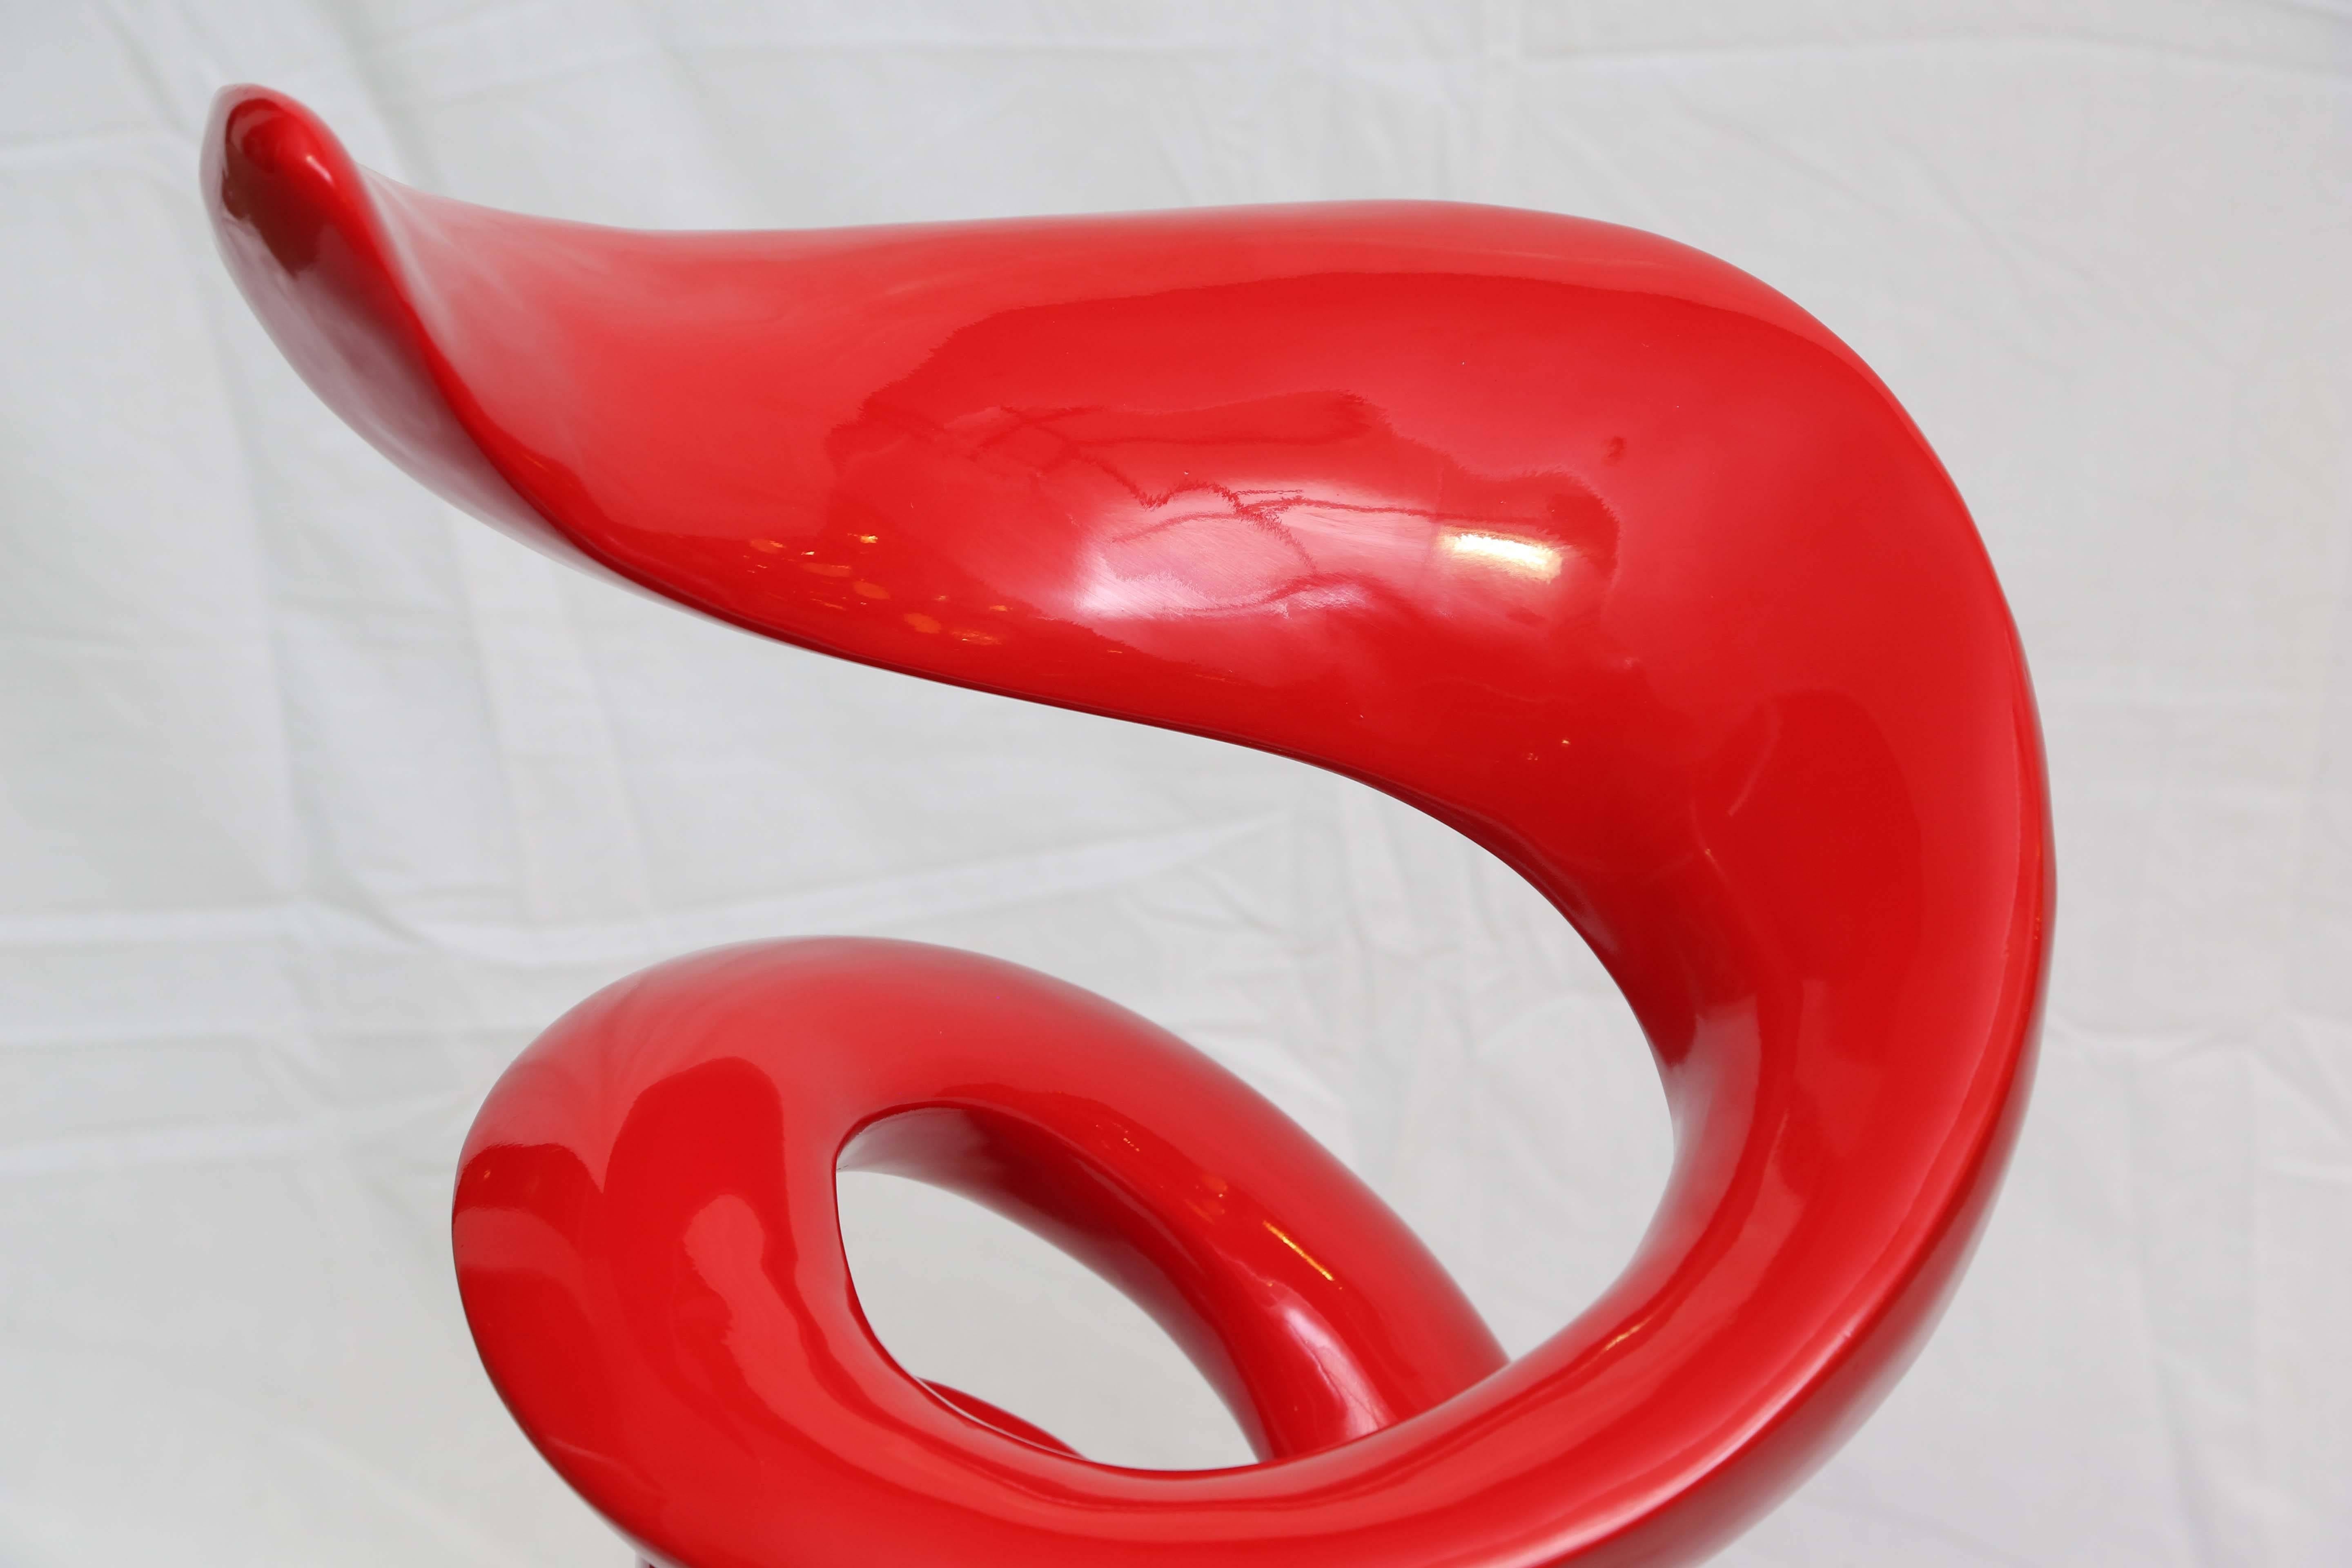 Fiberglass, Contemporary Abstract Industrial Sculpture in Red 2